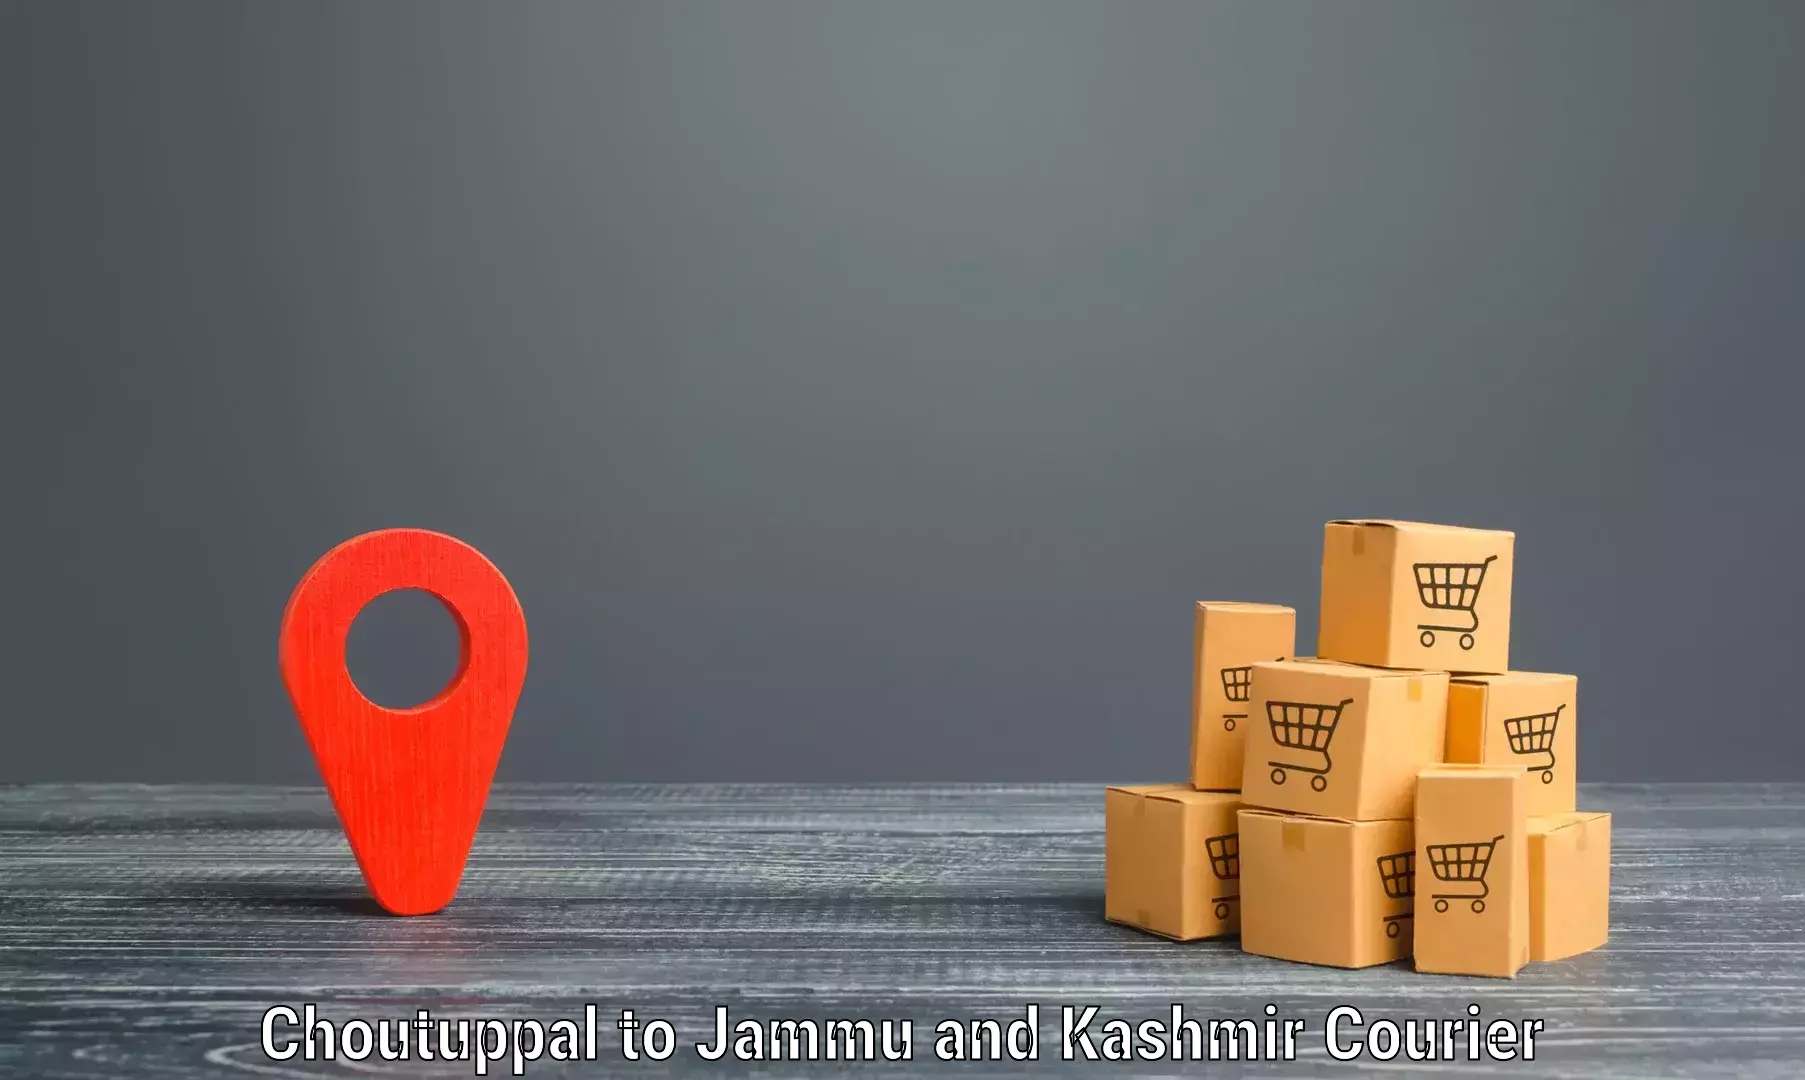 Lightweight parcel options Choutuppal to Bandipur